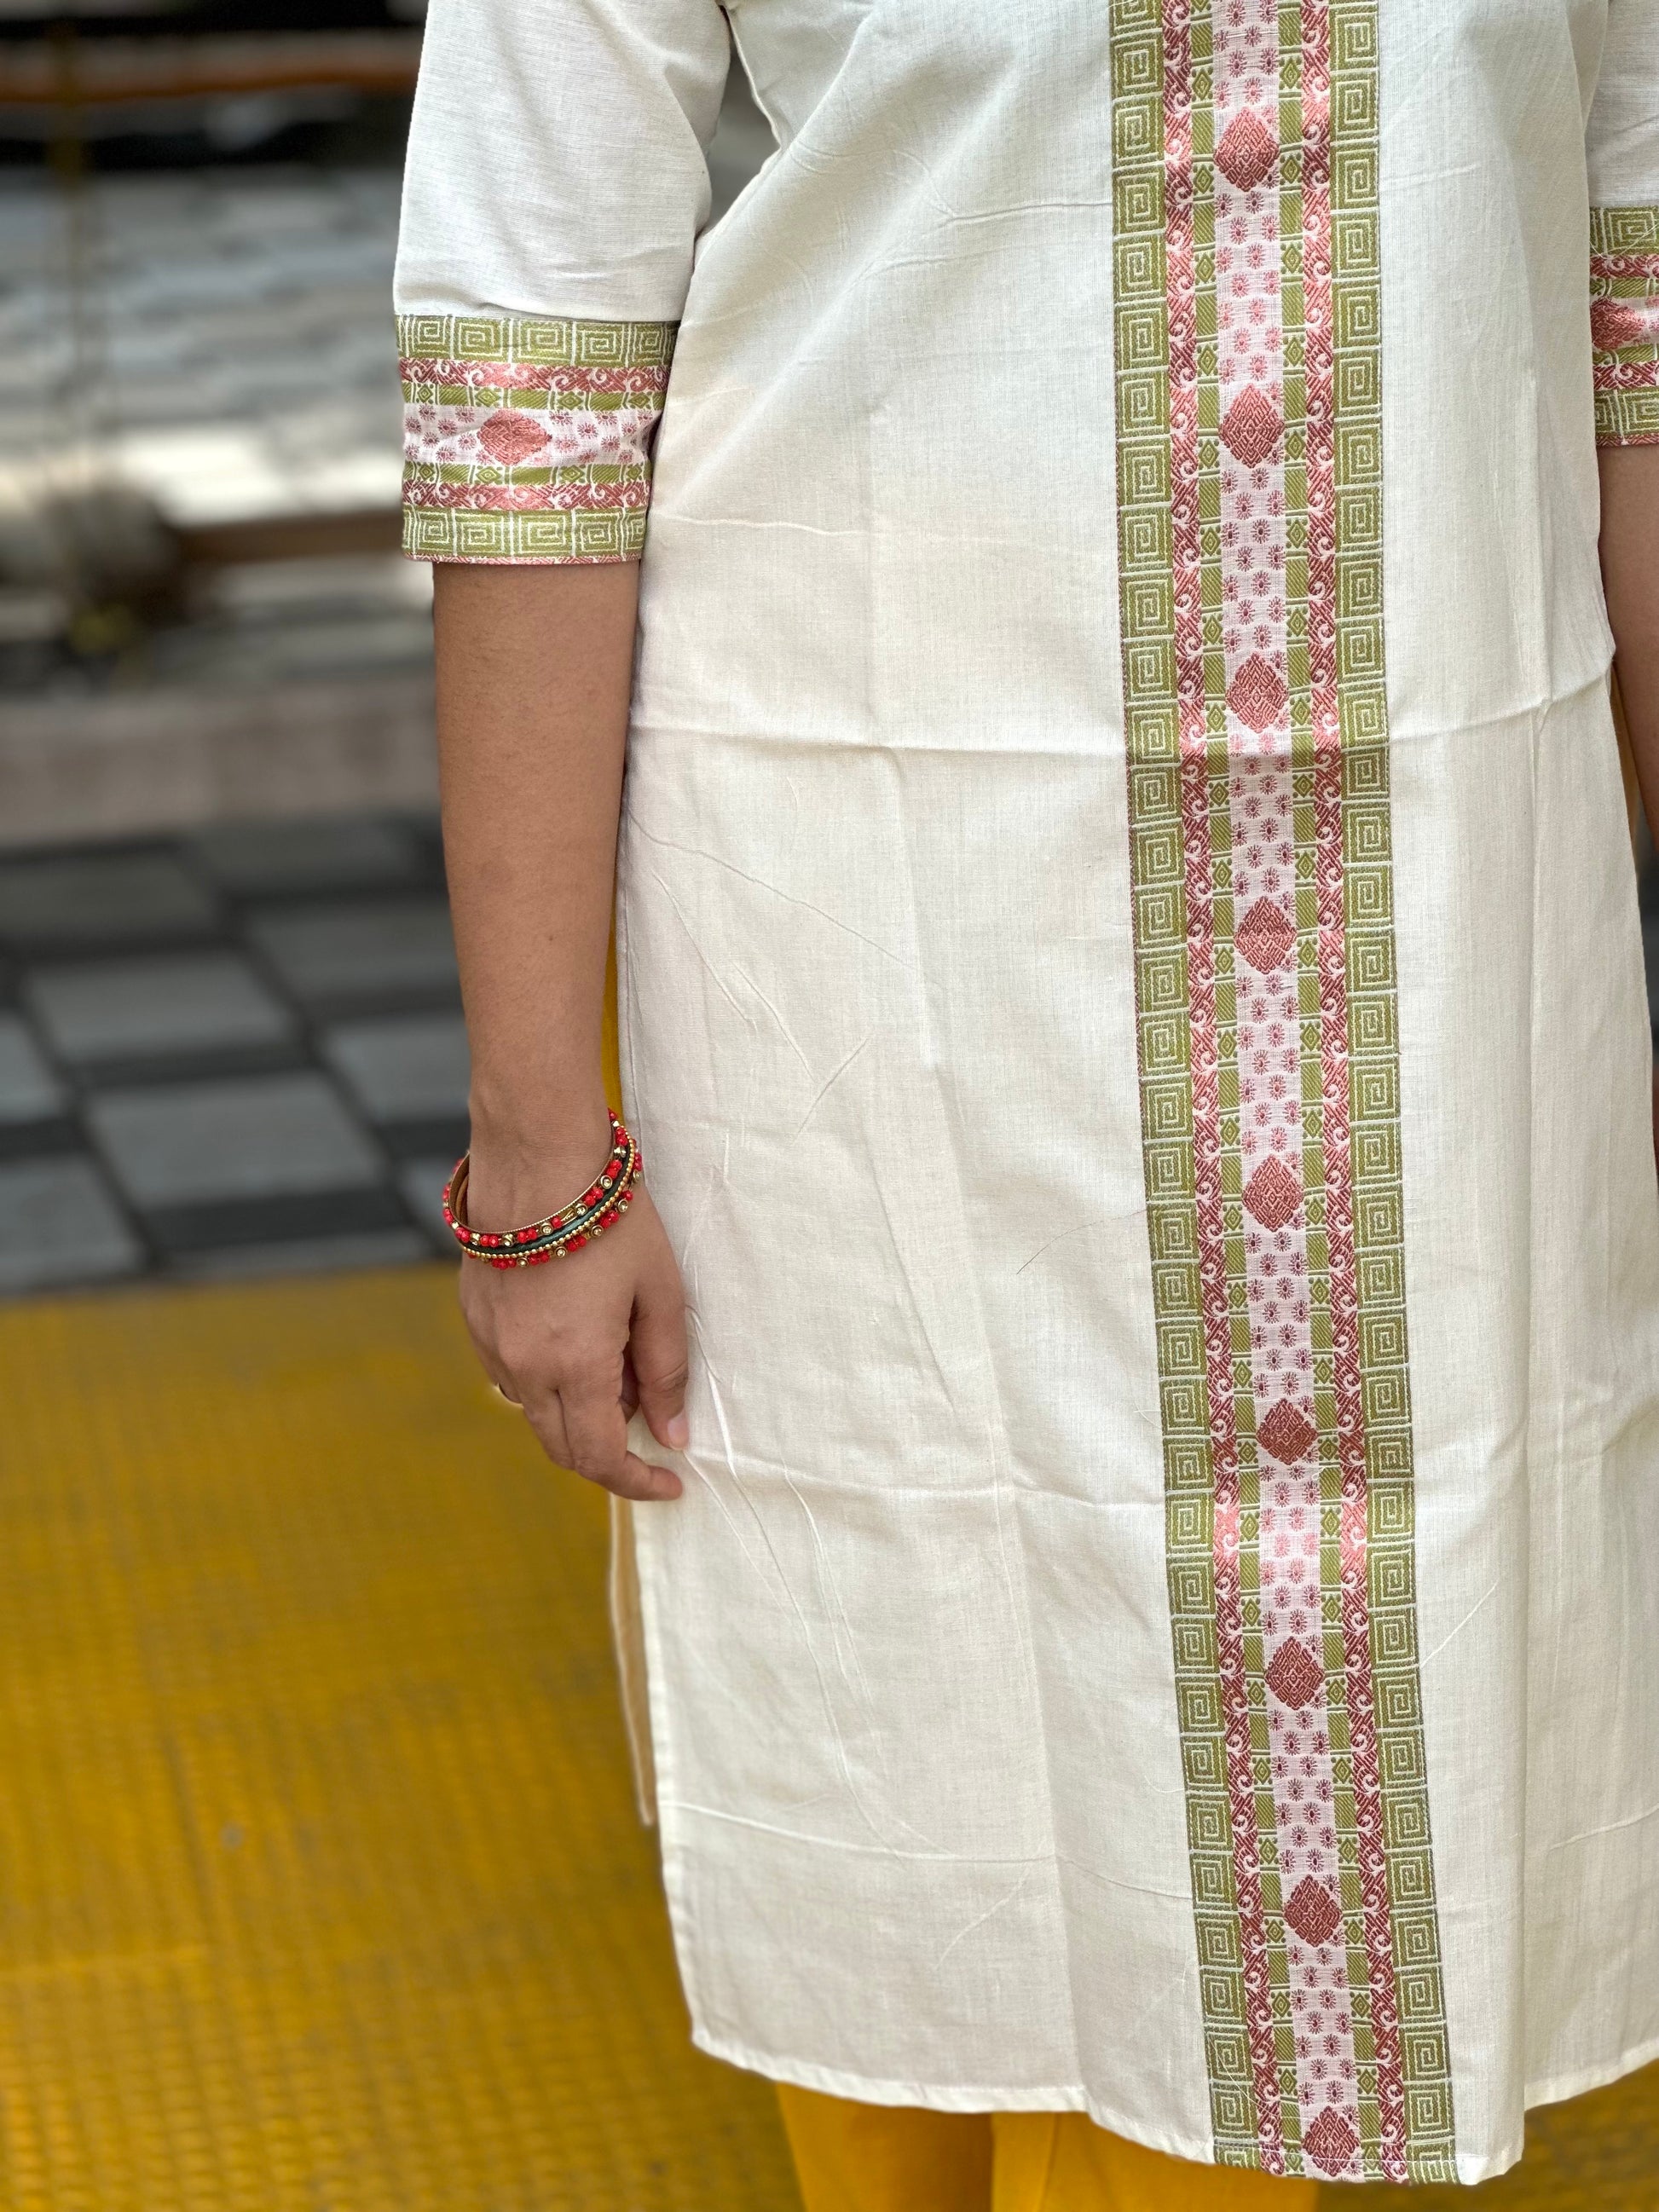 Beautiful Chanderi Kurtis with Hand Embroidery embellishments. | Onam  outfits, Traditional dresses designs, Saree dress